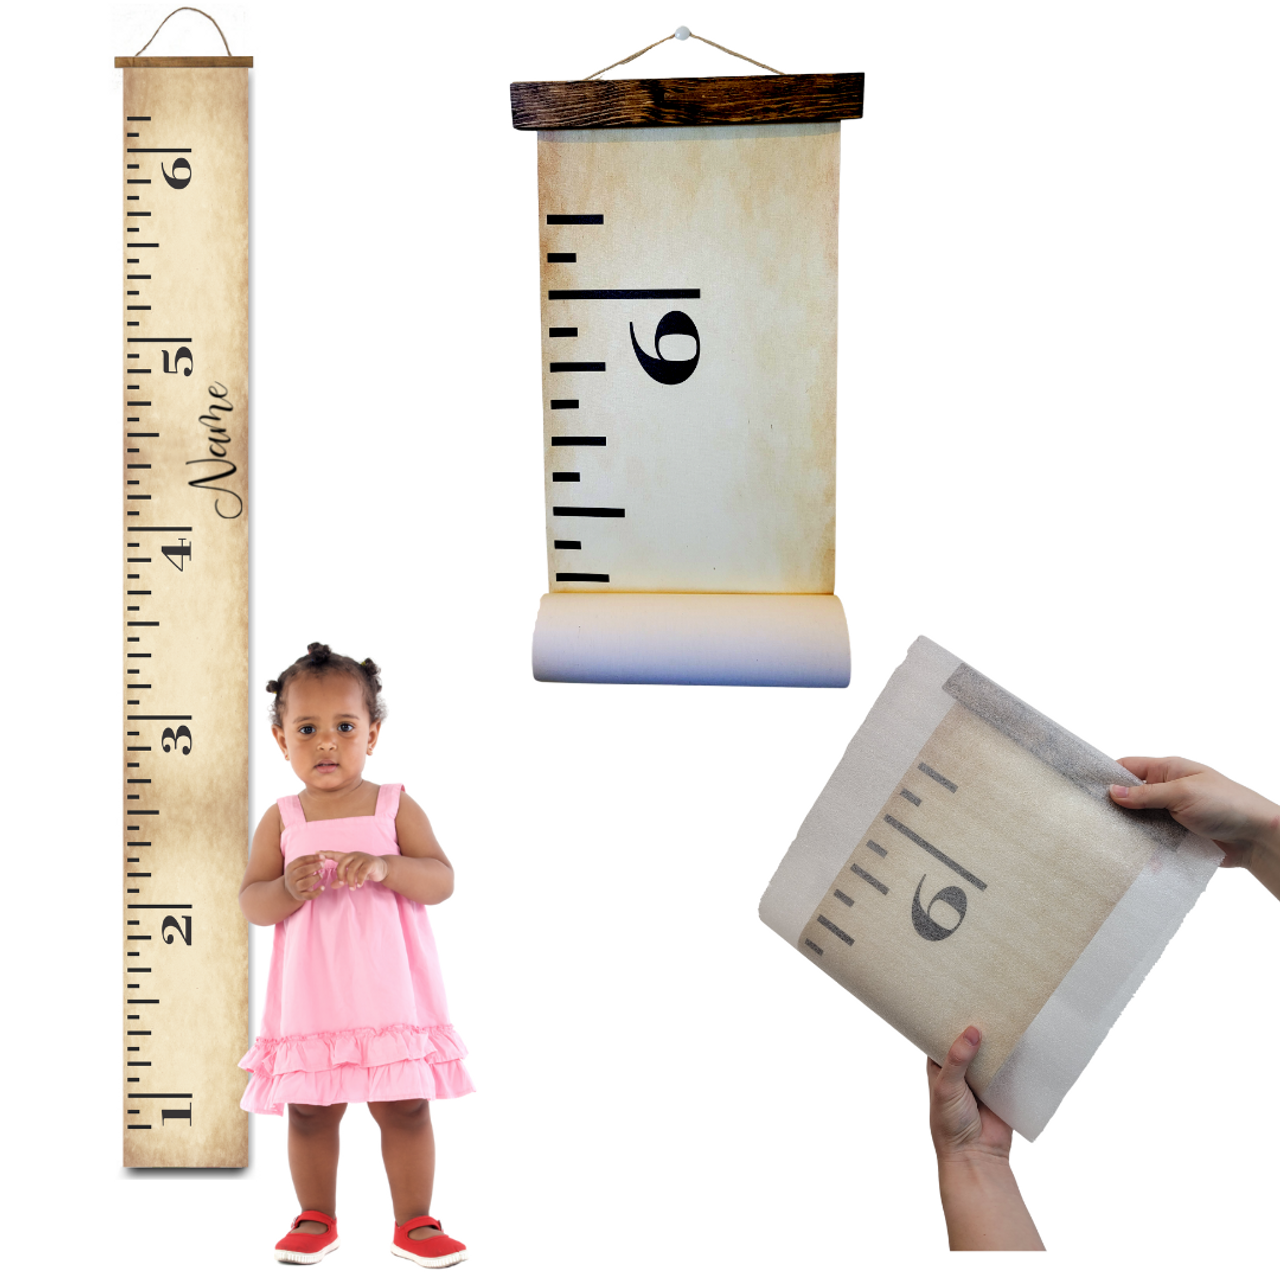 Personalized Wooden Ruler Growth Chart for Kids, Custom Name Growth Chart  Wall Hanging Decor for Baby Boy and Girl, Large Family Measuring Board  Wood